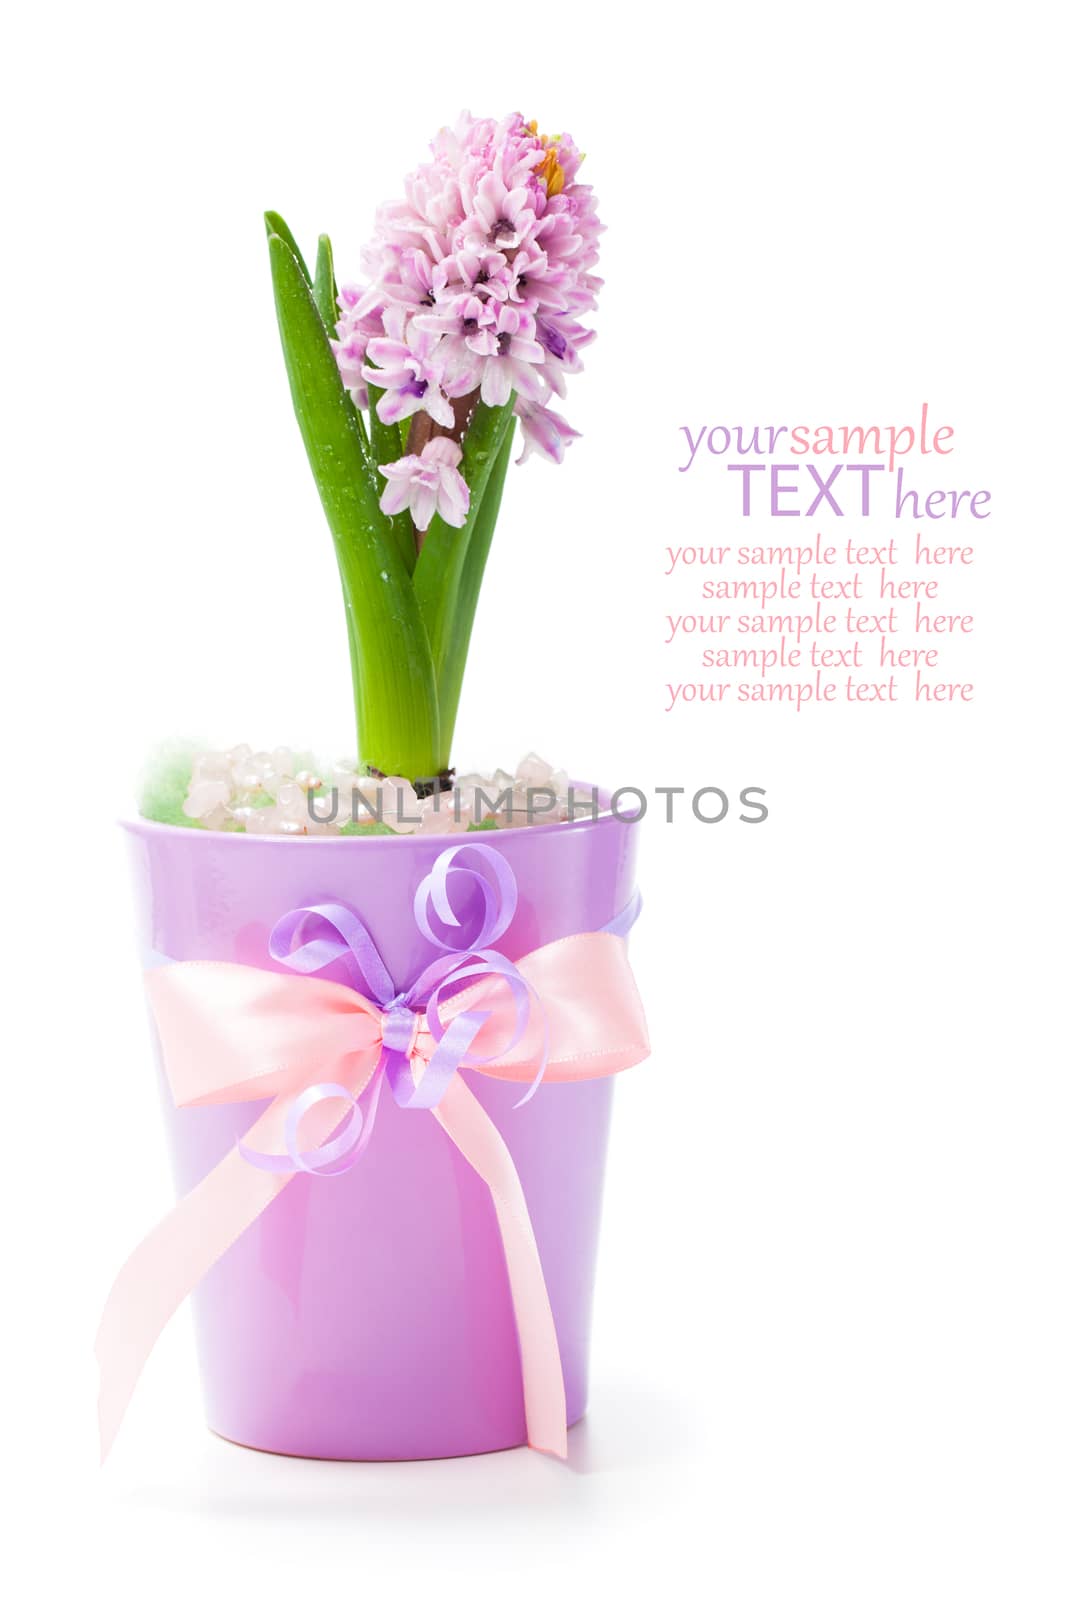 pink hyacinth flowers, isolated on white background.